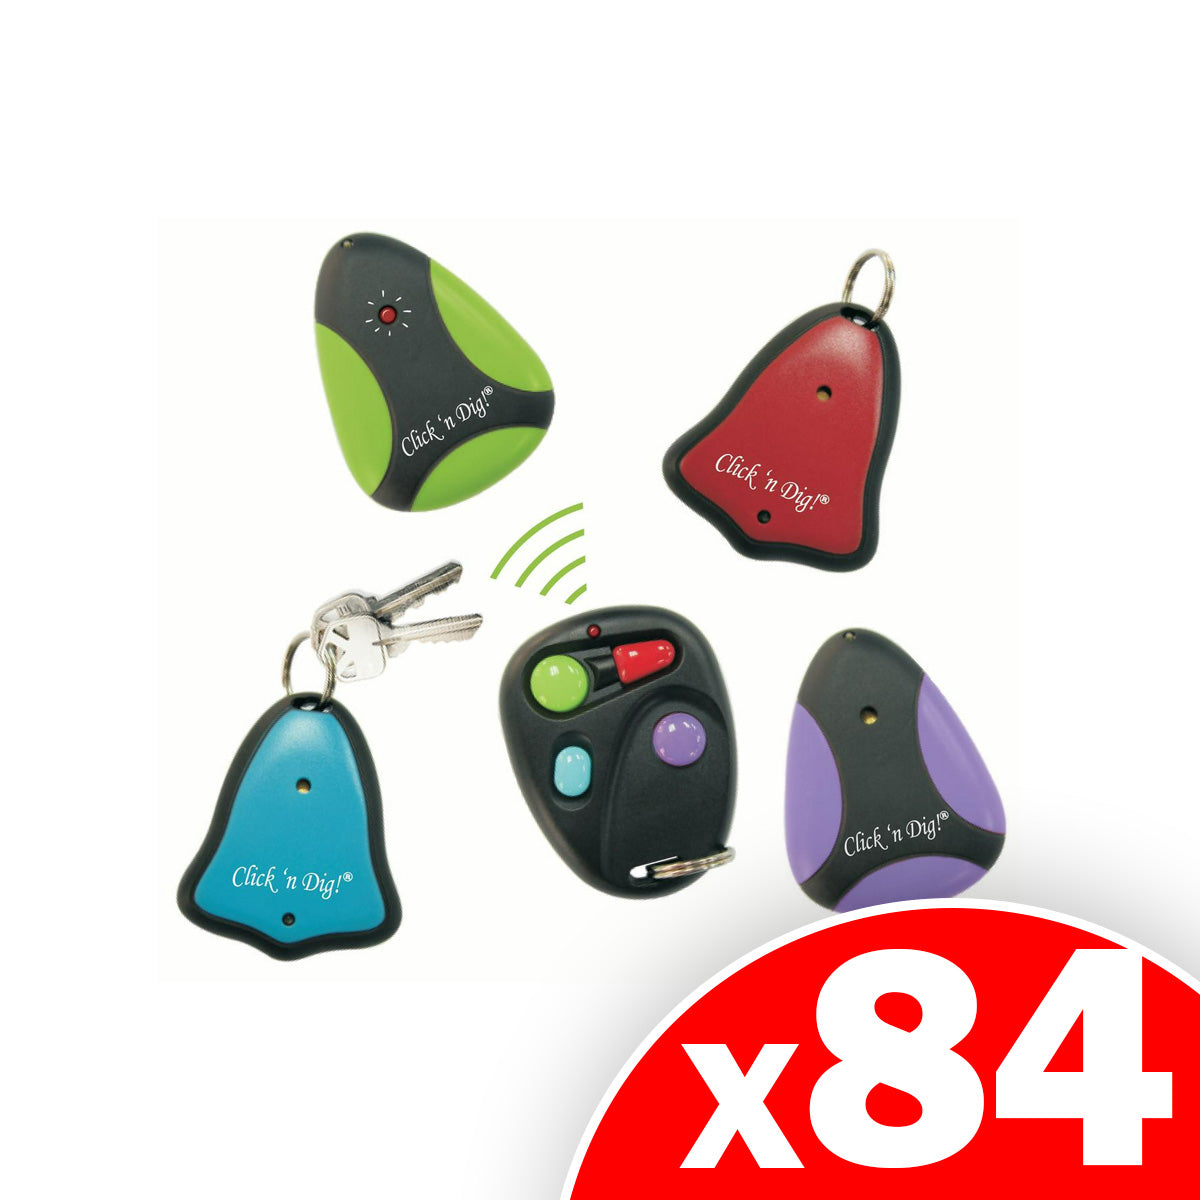 ClicknDig Click 'n Dig Model E4 Radio Frequency Electronic Key Finder, 4 Receivers